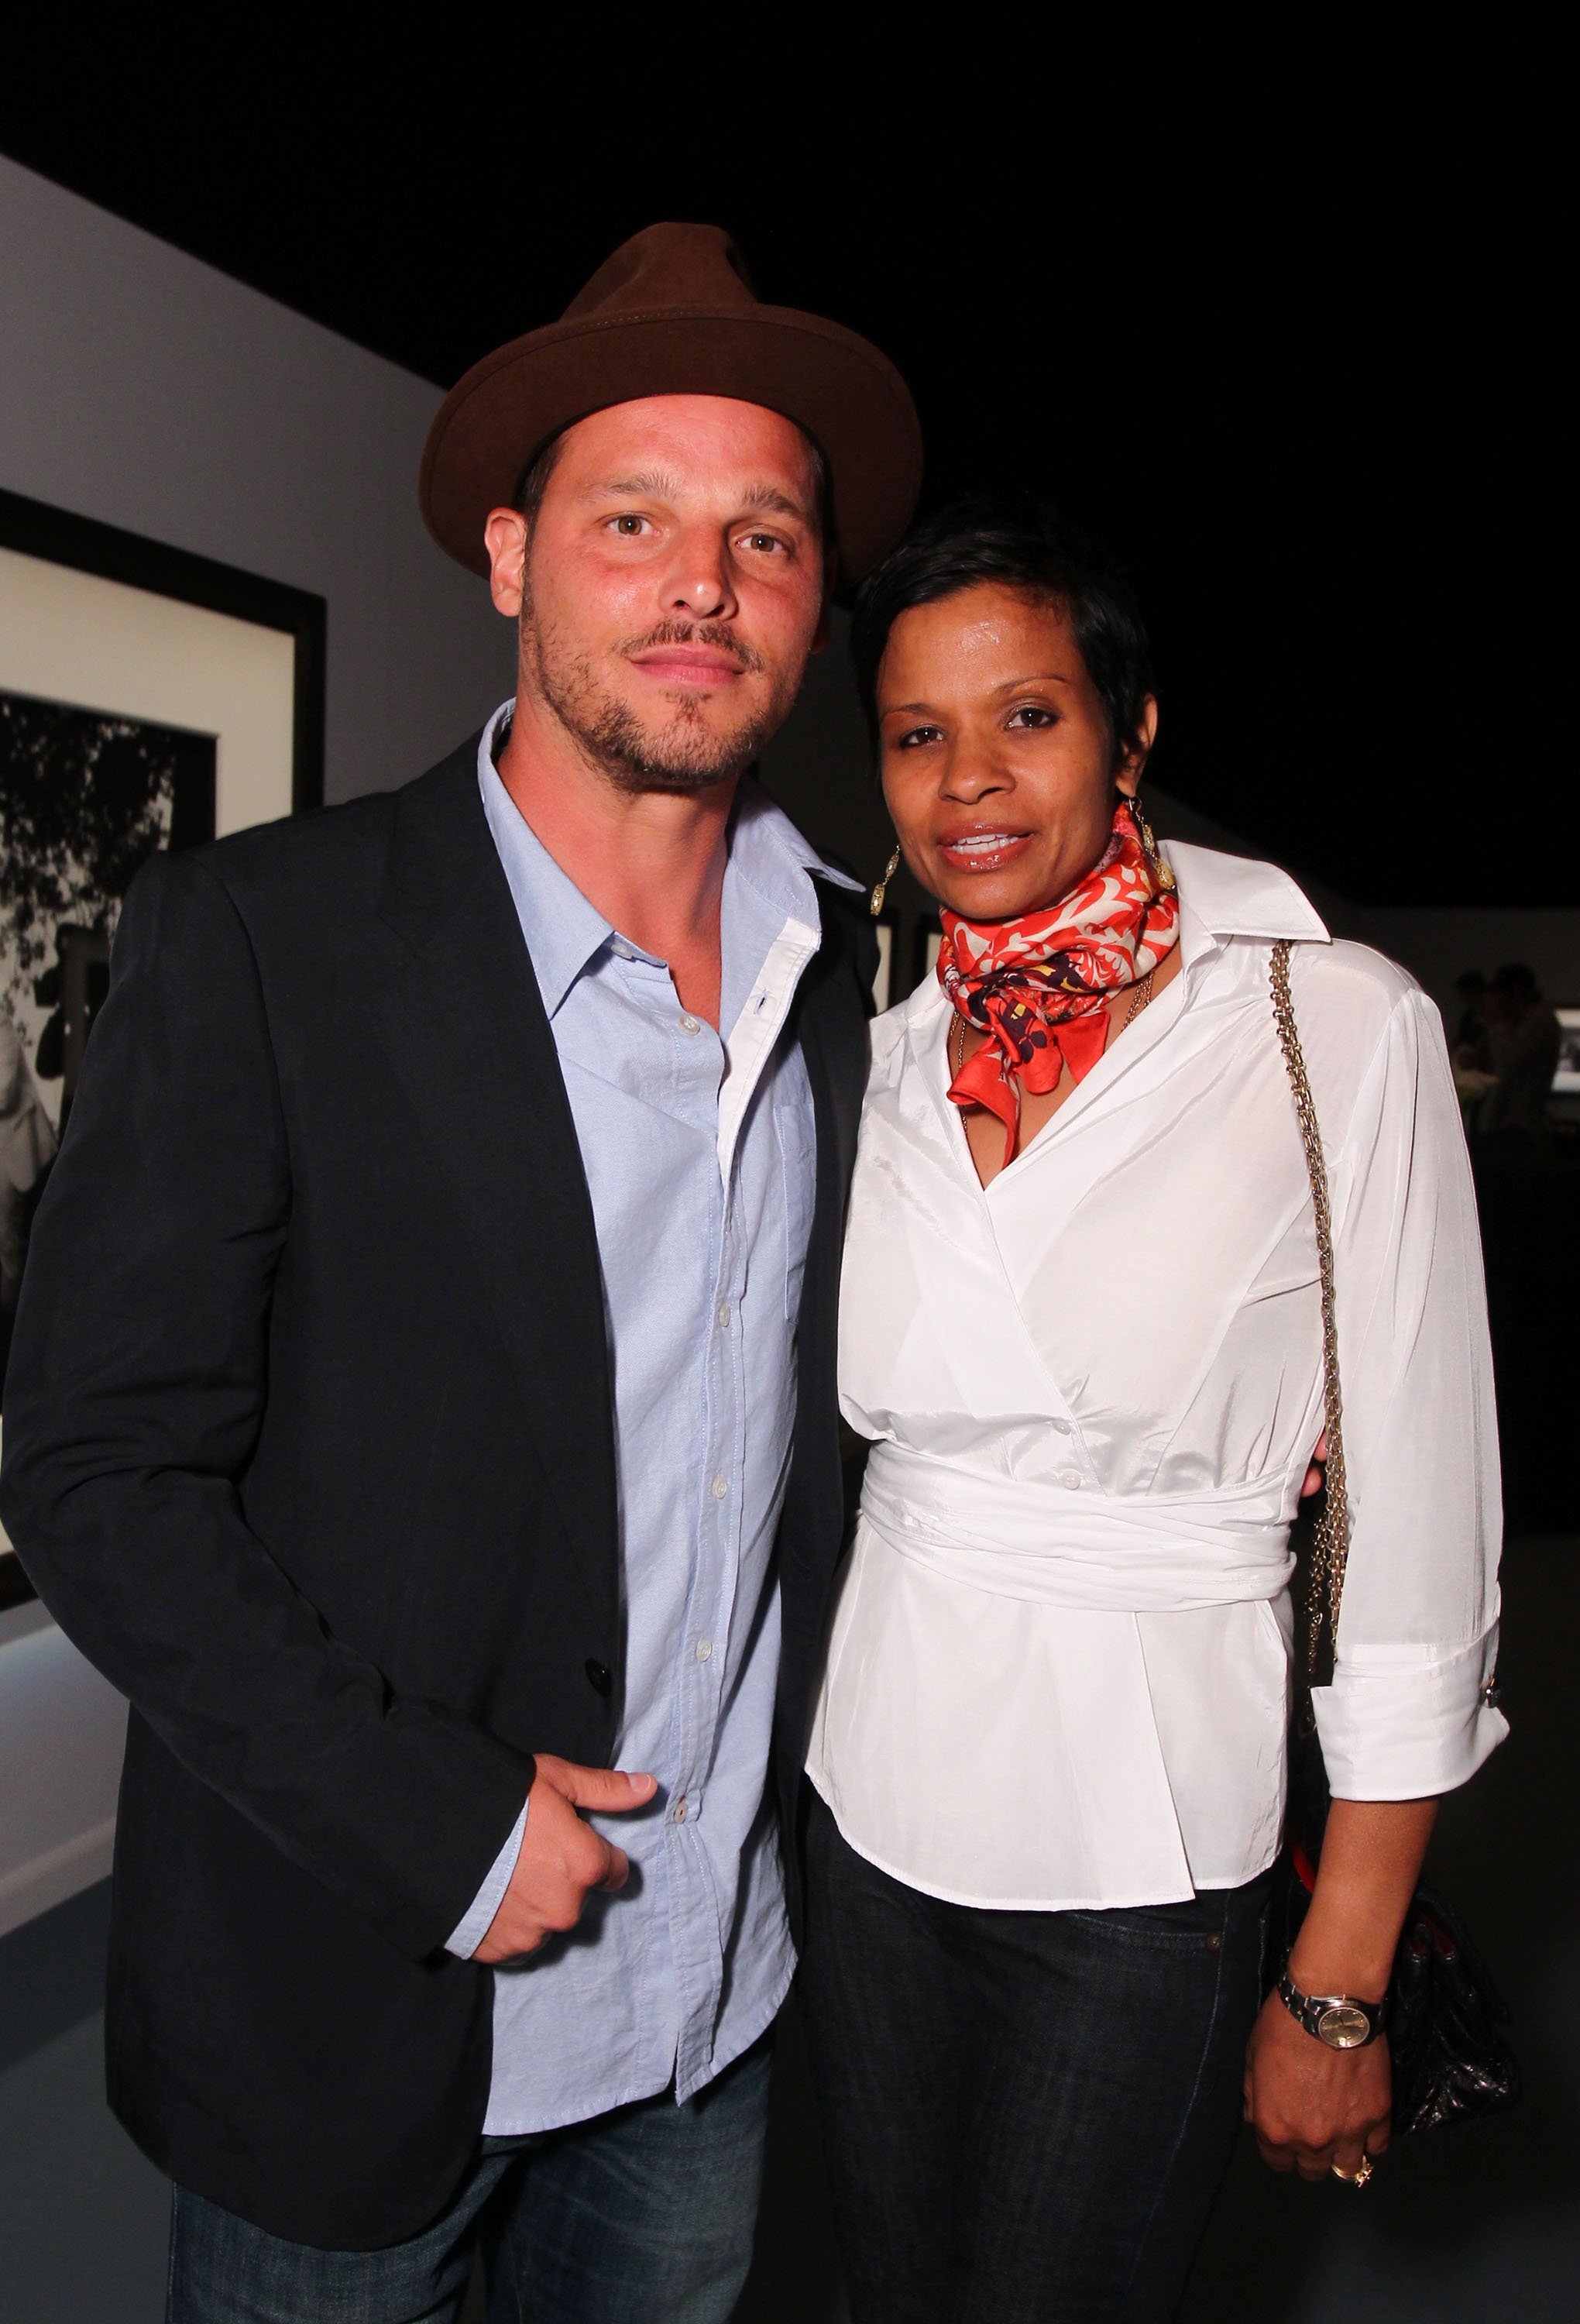 Justin Chambers and Keisha Chambers on April 28, 2011 in Culver City, California | Source: Getty Images